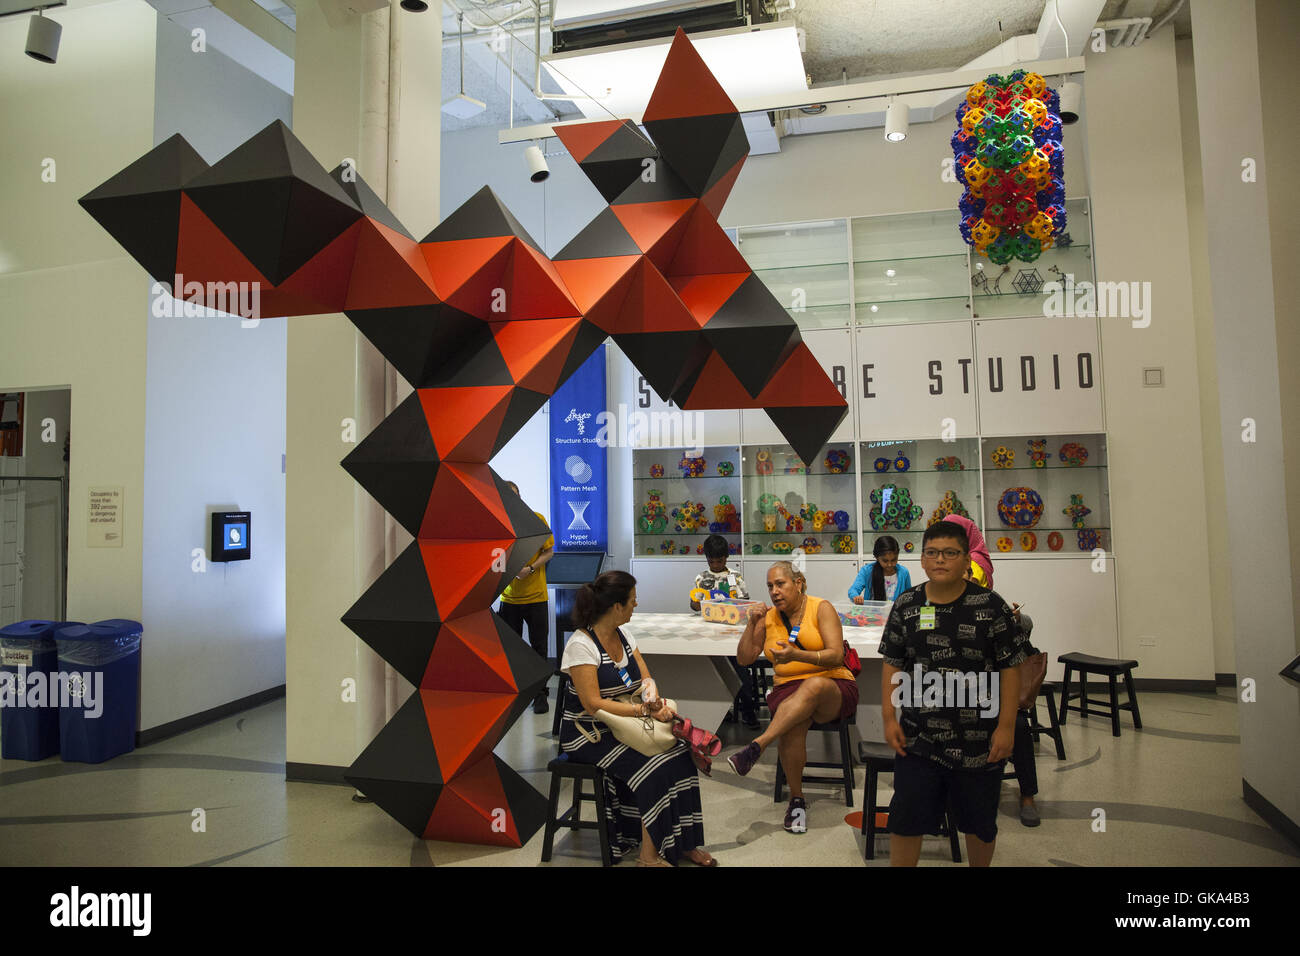 Children and adults explore mathematically based exhibits at the International Museum of Mathematics in New York City. Stock Photo